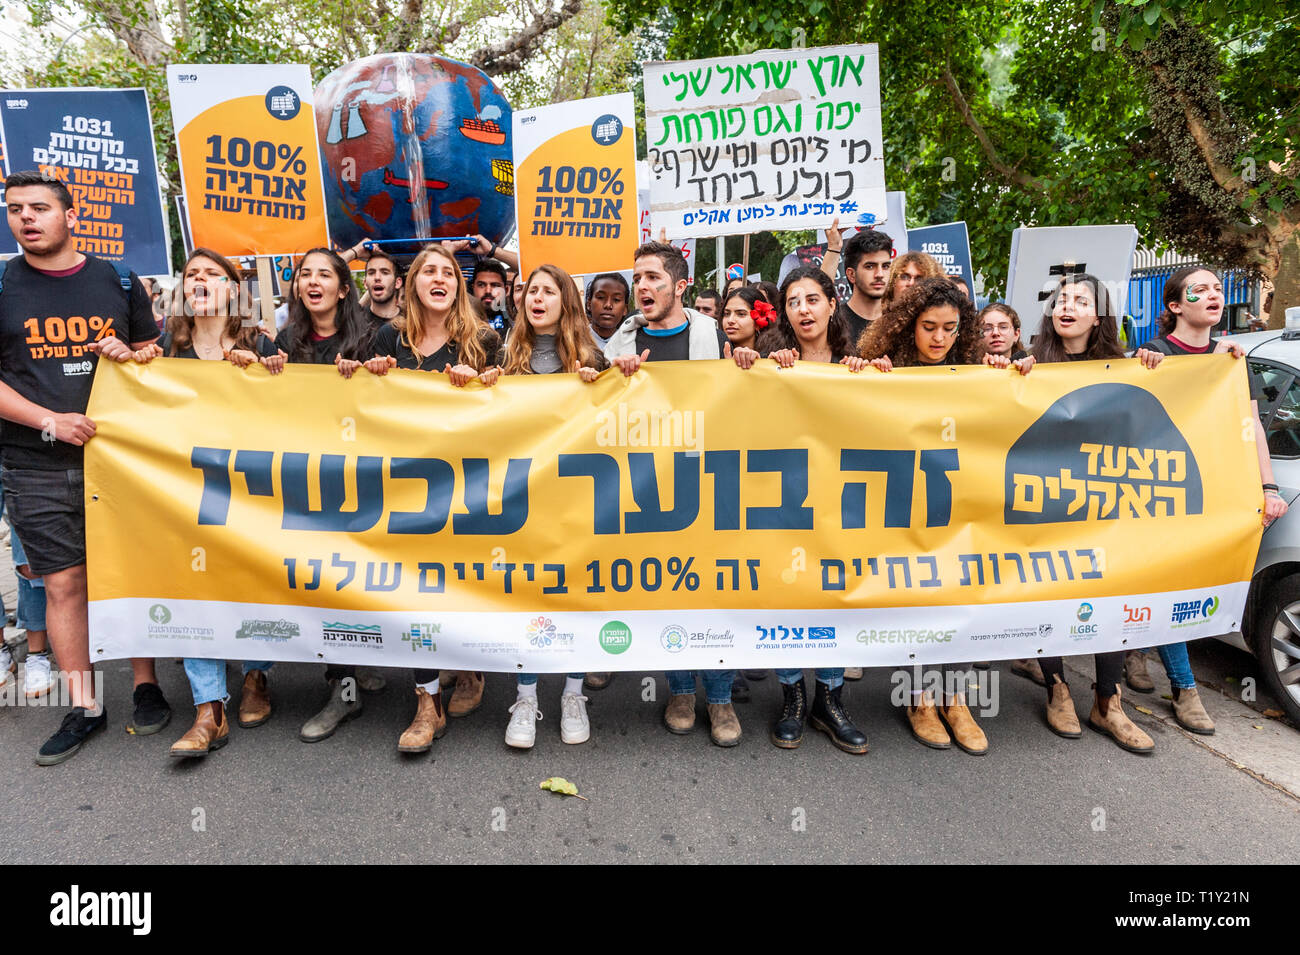 Israel, Tel Aviv - 29 March 2019: Demonstration for the climate on King George street Stock Photo